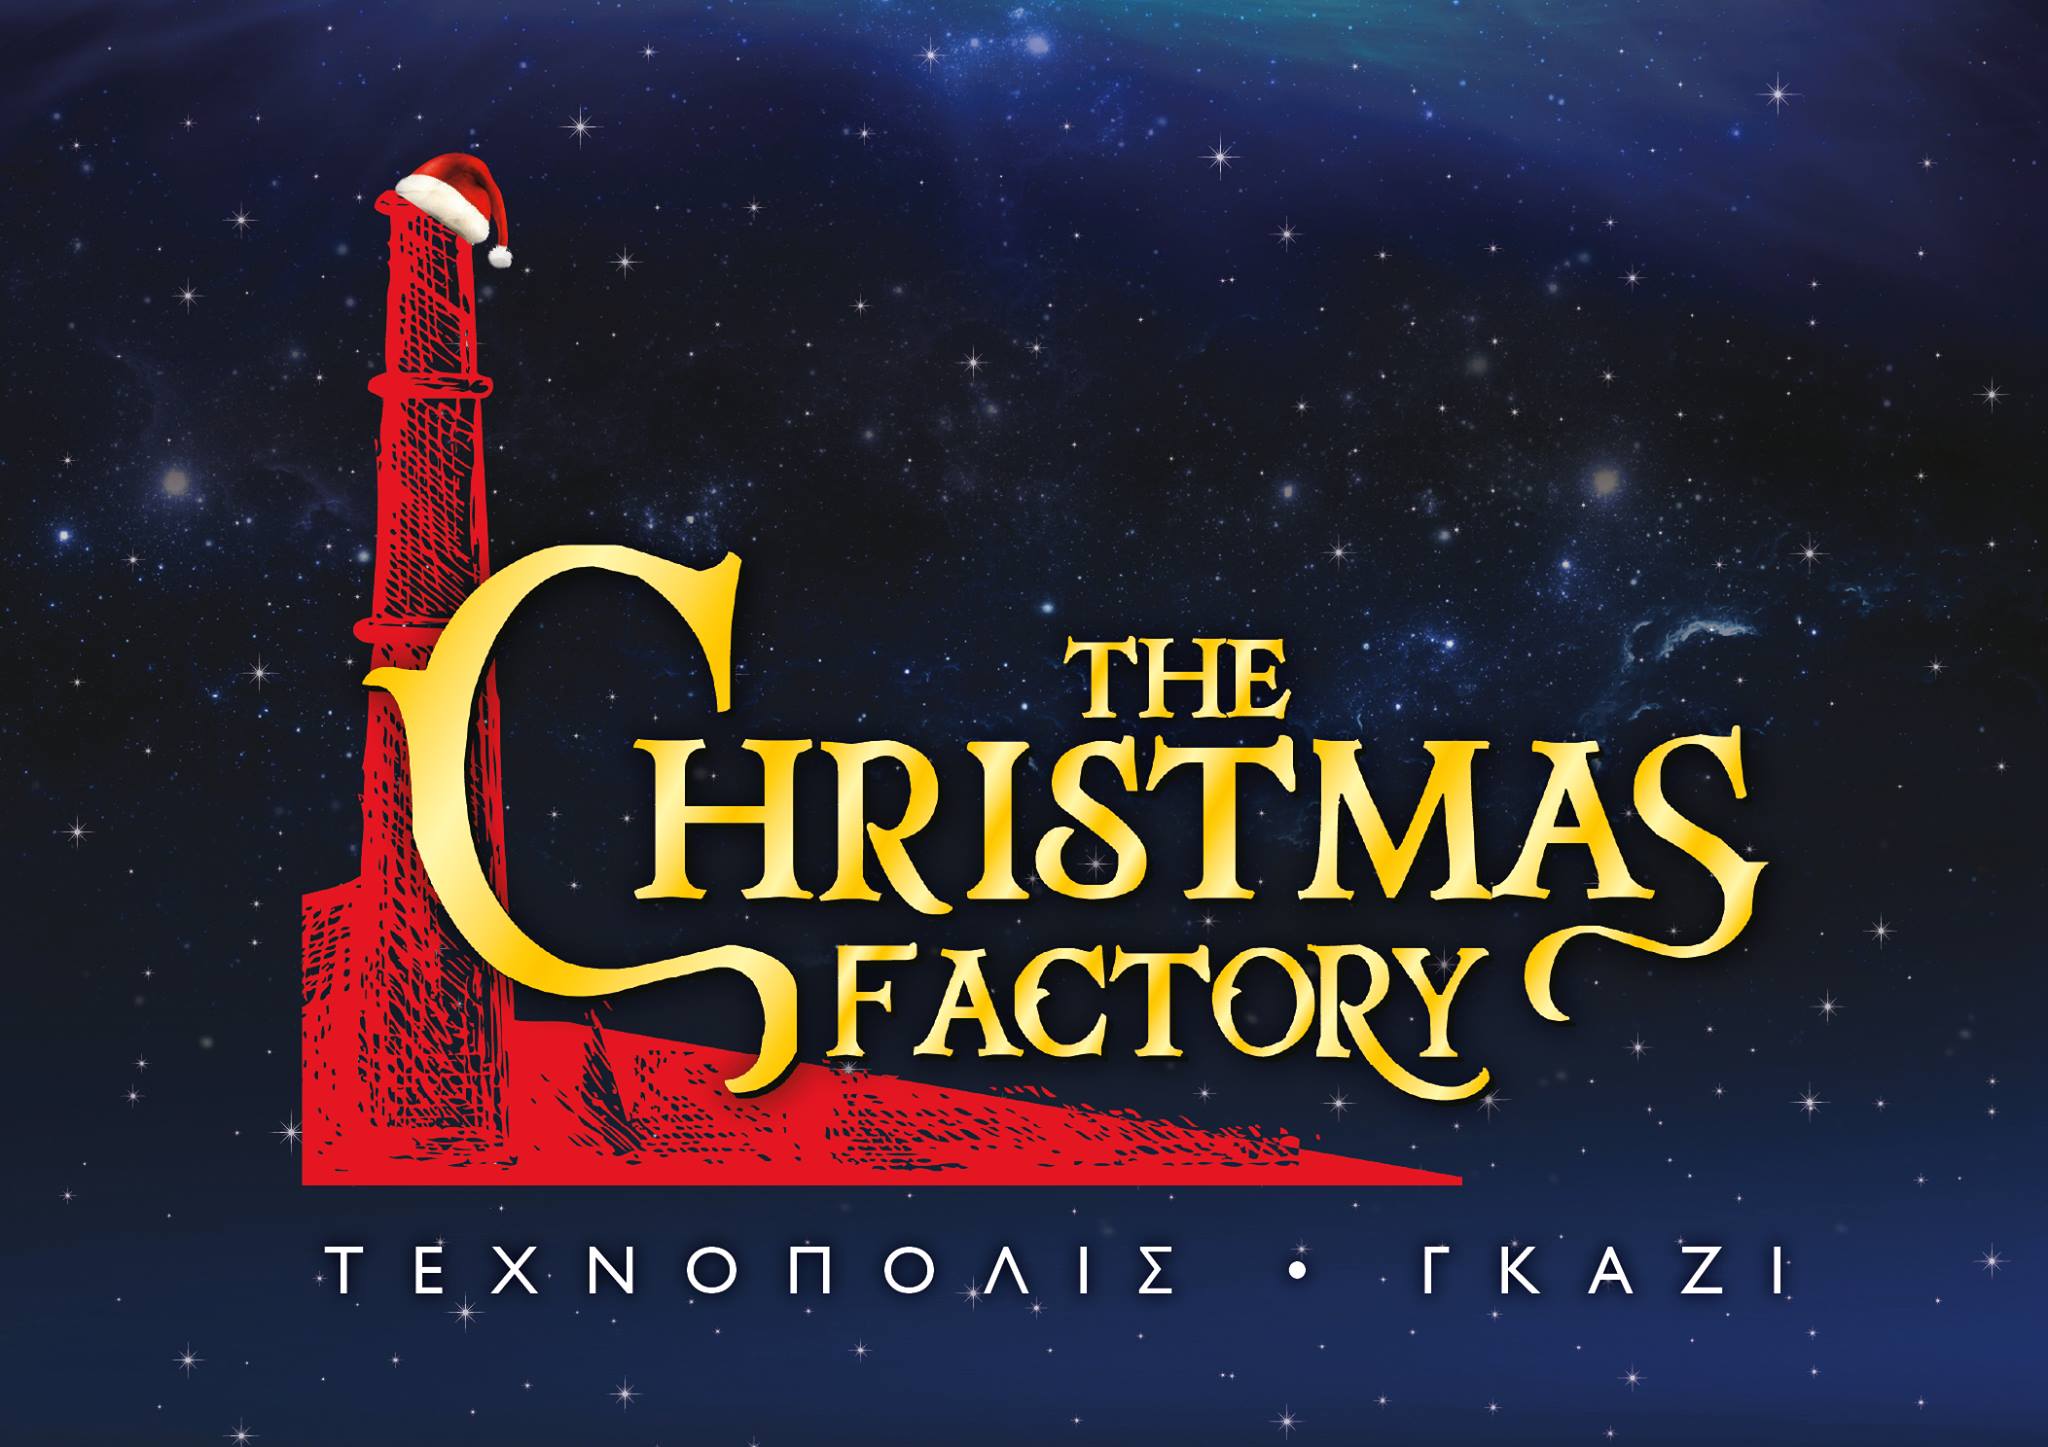 The Christmas Factory